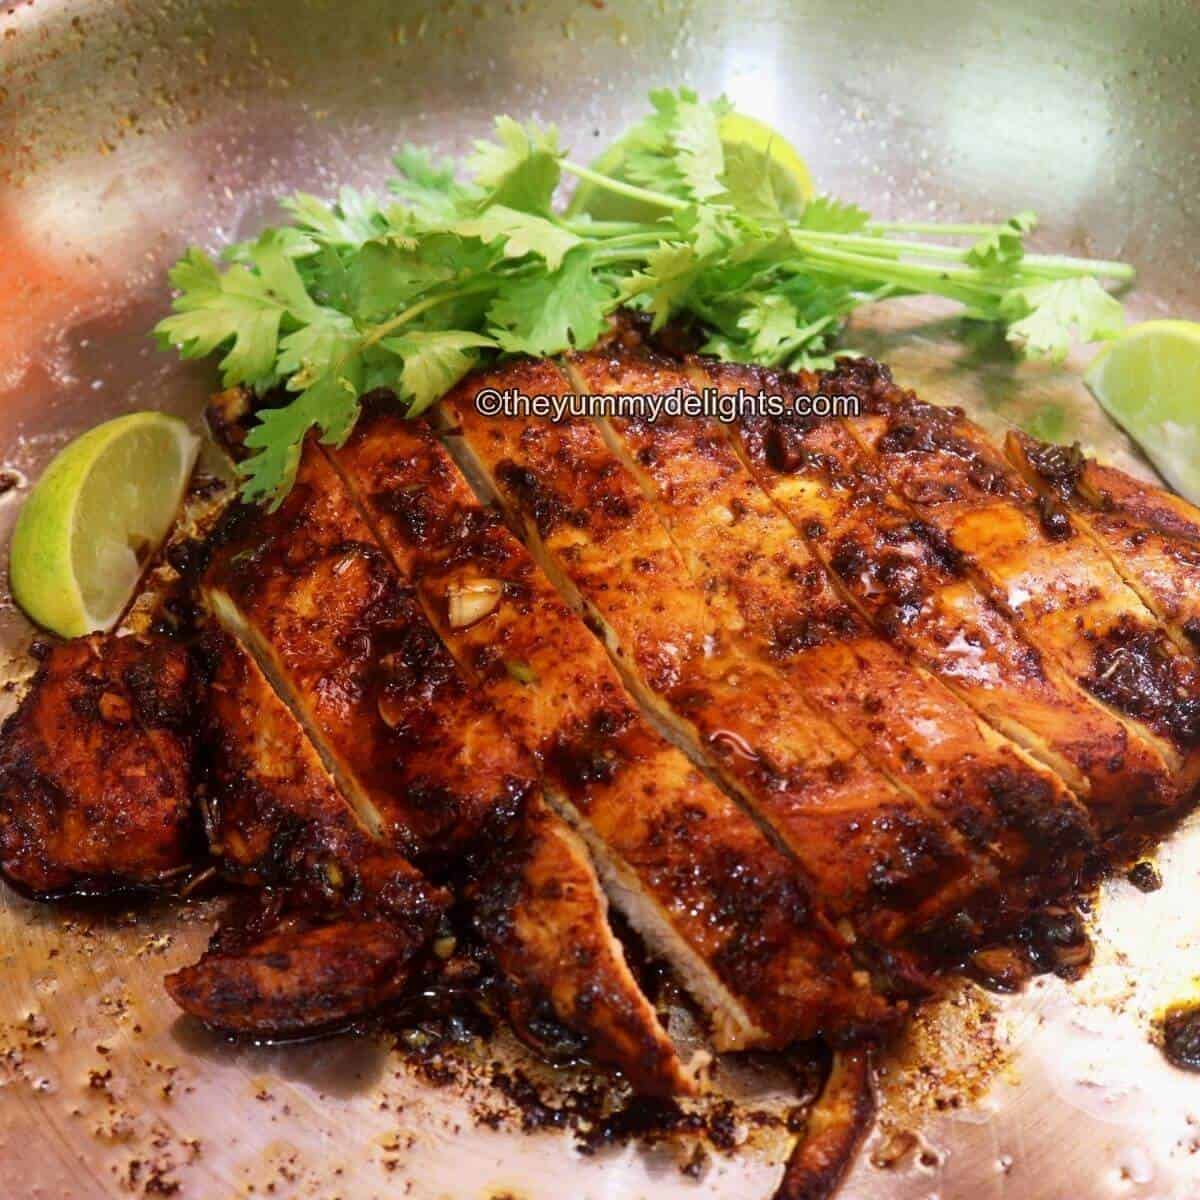 lime cilantro chicken in a pan. This Mexican lime chicken is garnished with cilantro leaves and lime wedges.